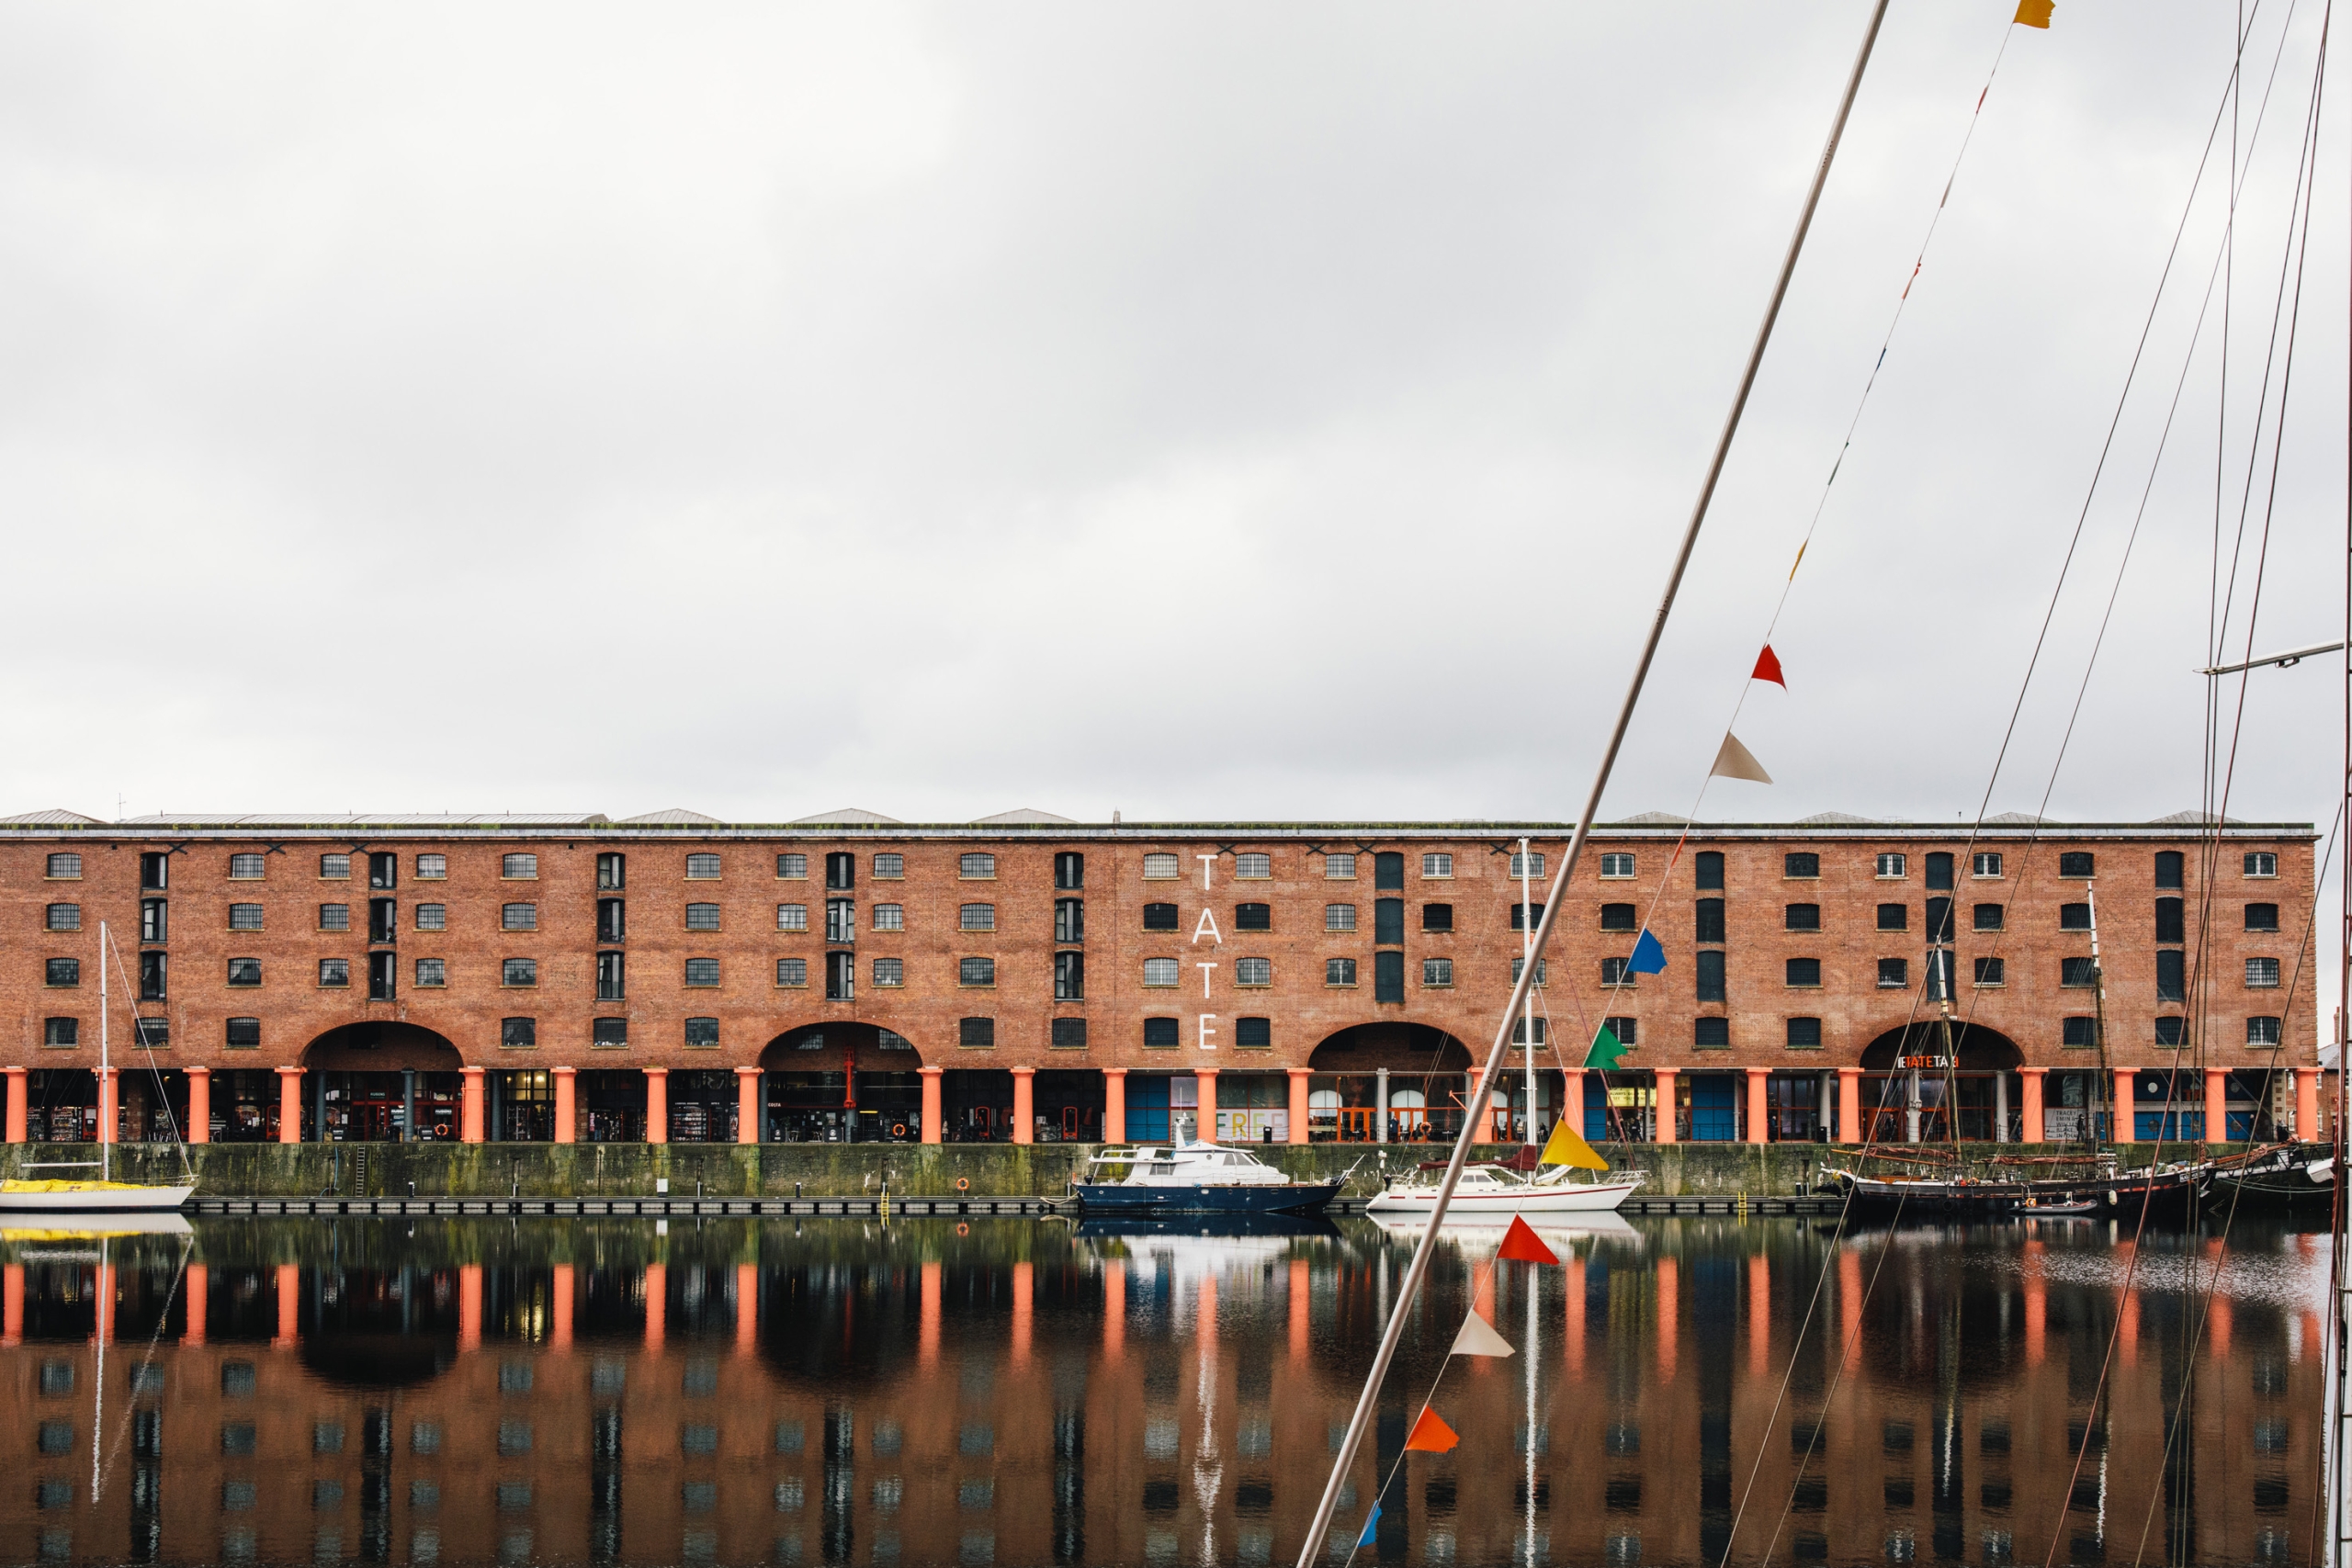 Tate Liverpool viewed from opposite side of alvert dock against a grey sky